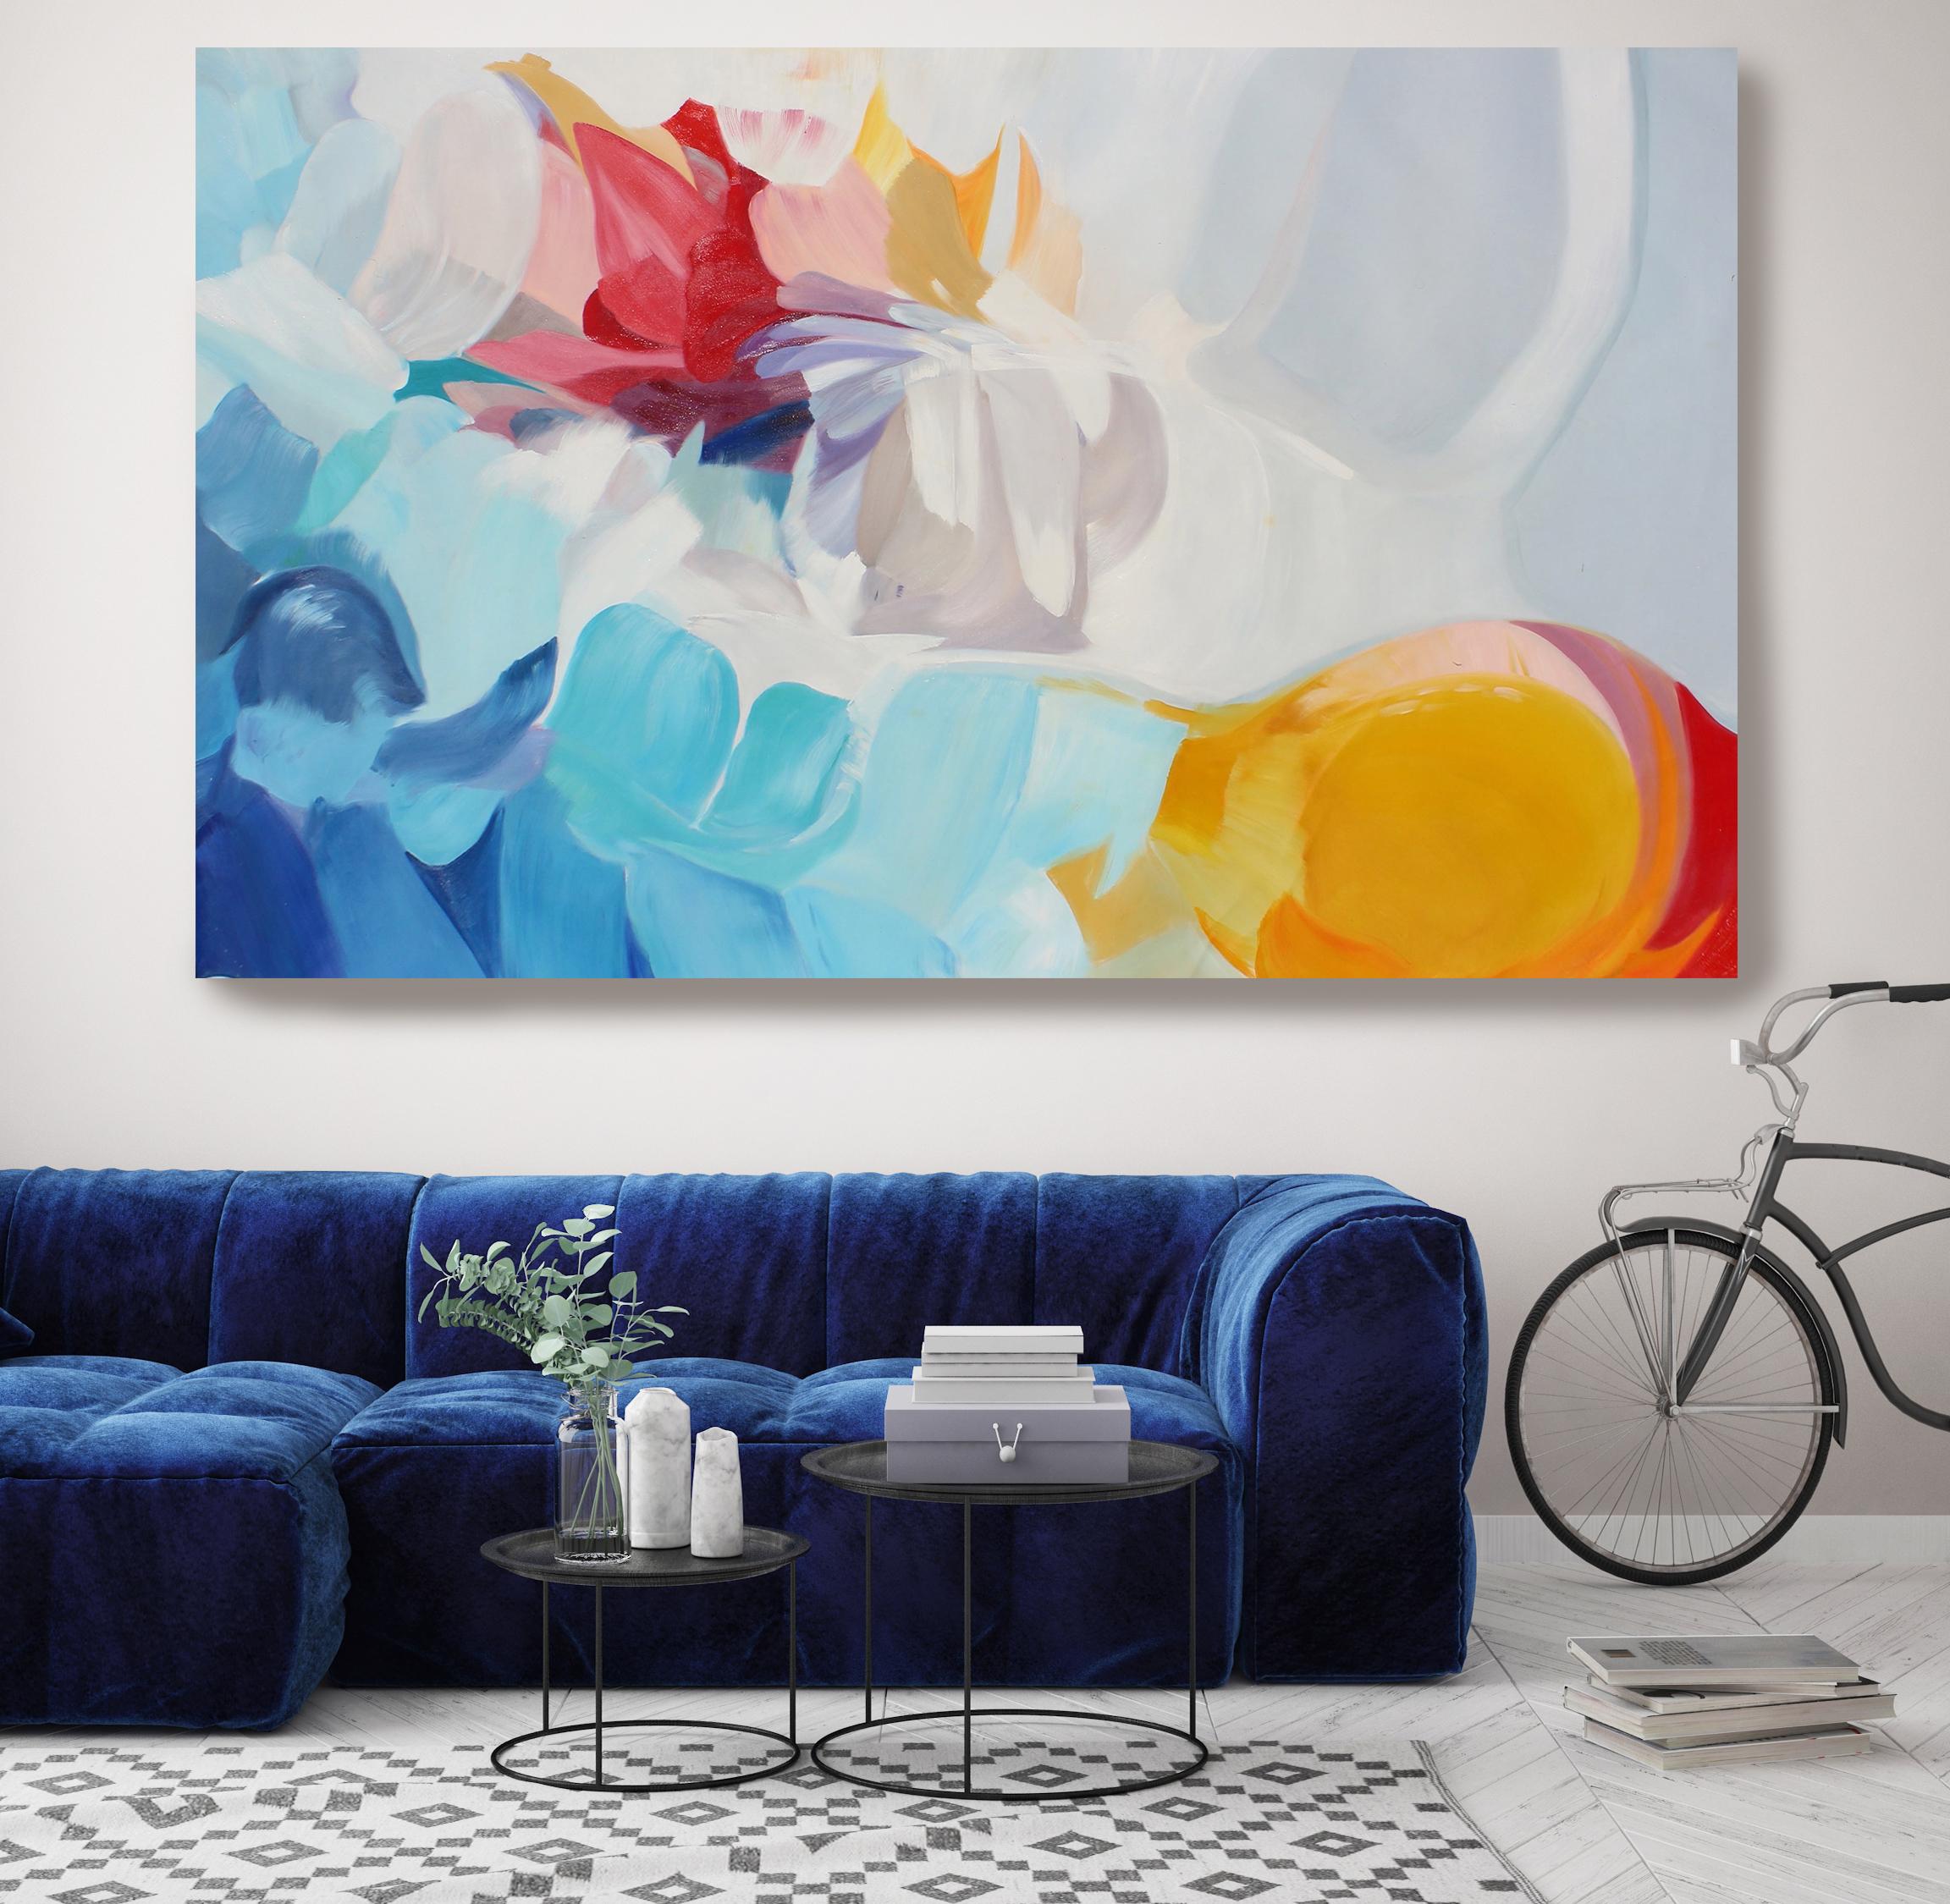 Irena Orlov Interior Painting - Santa Fe: Blue Red Yellow Abstract Oil Painting